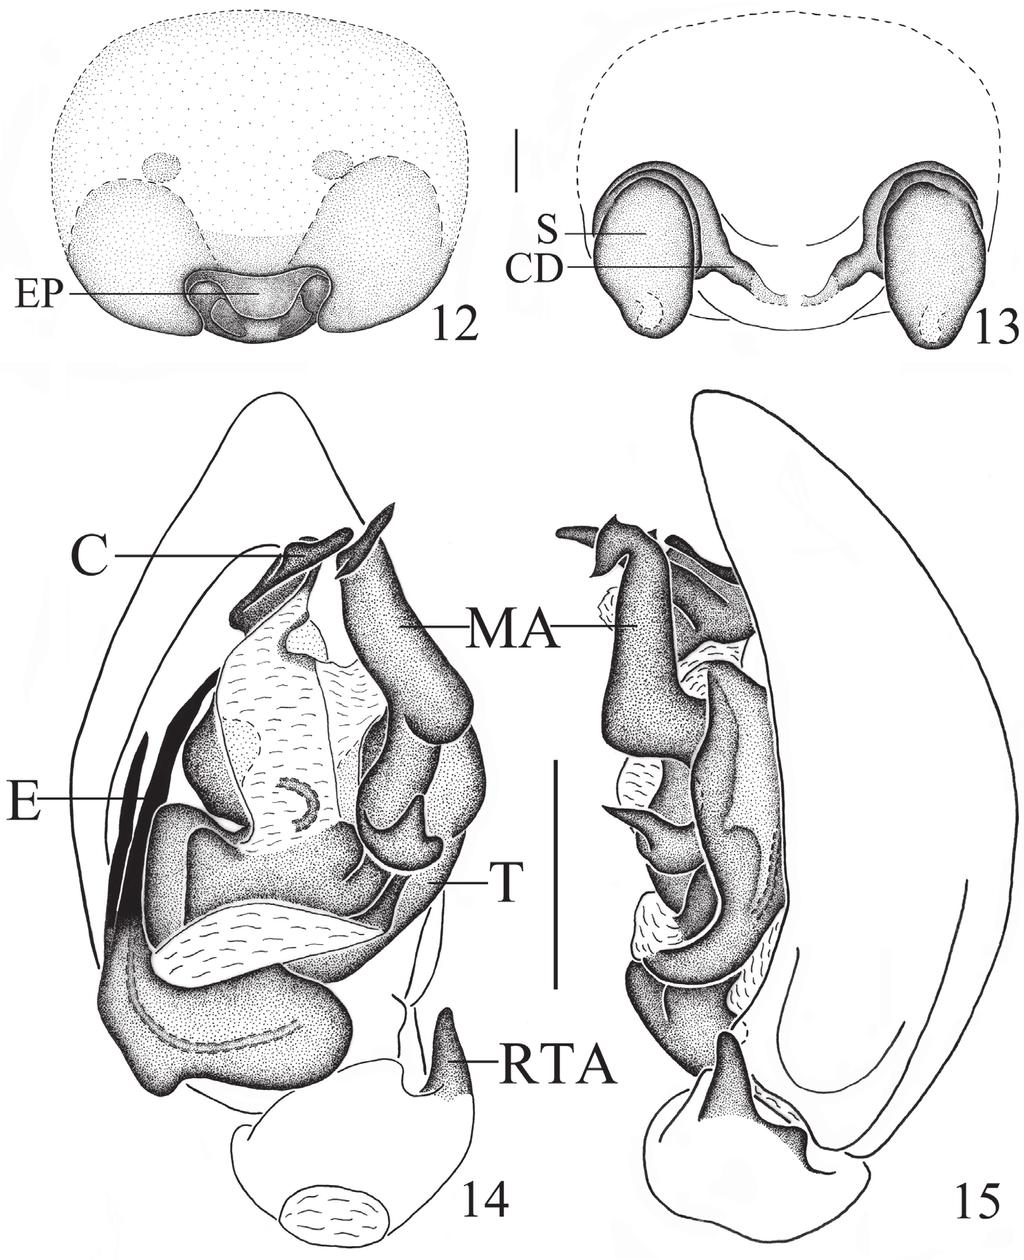 84 Chi Jin & Feng Zhang / ZooKeys @@: @@ @@ (2013) Figures 12 15. Mallinella sphaerica sp. n., 12 epigyne, ventral view 13 vulva 14 left male palp, ventral view 15 same, retrolateral view.